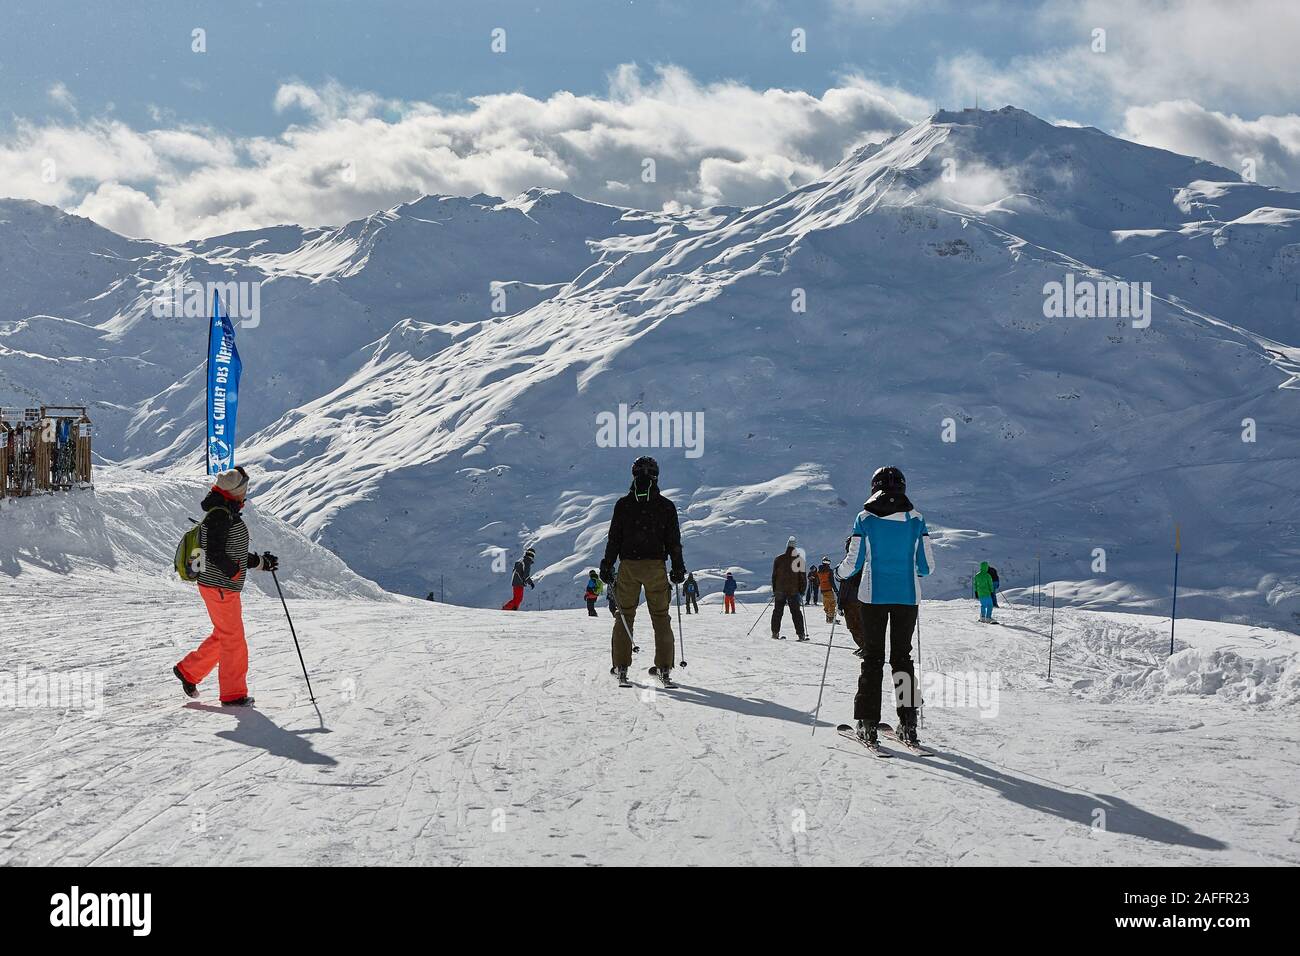 Skiing slopes with skiers Stock Photo